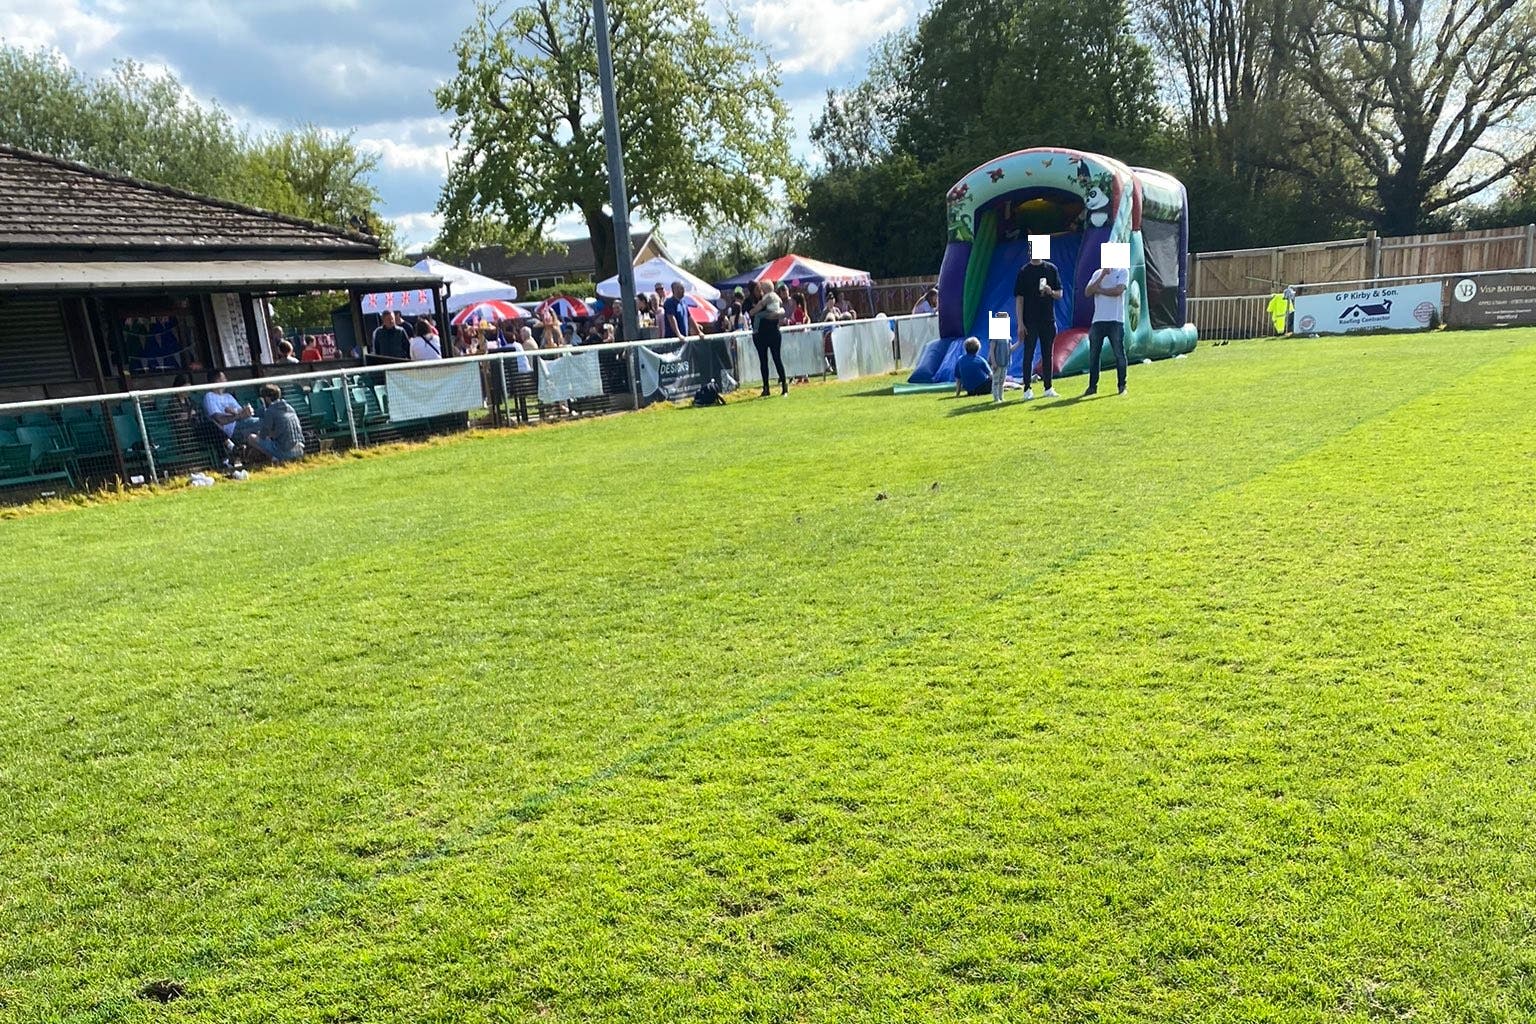 The bouncy castle on the pitch at Colney Heath (Colney Heath Ladies)